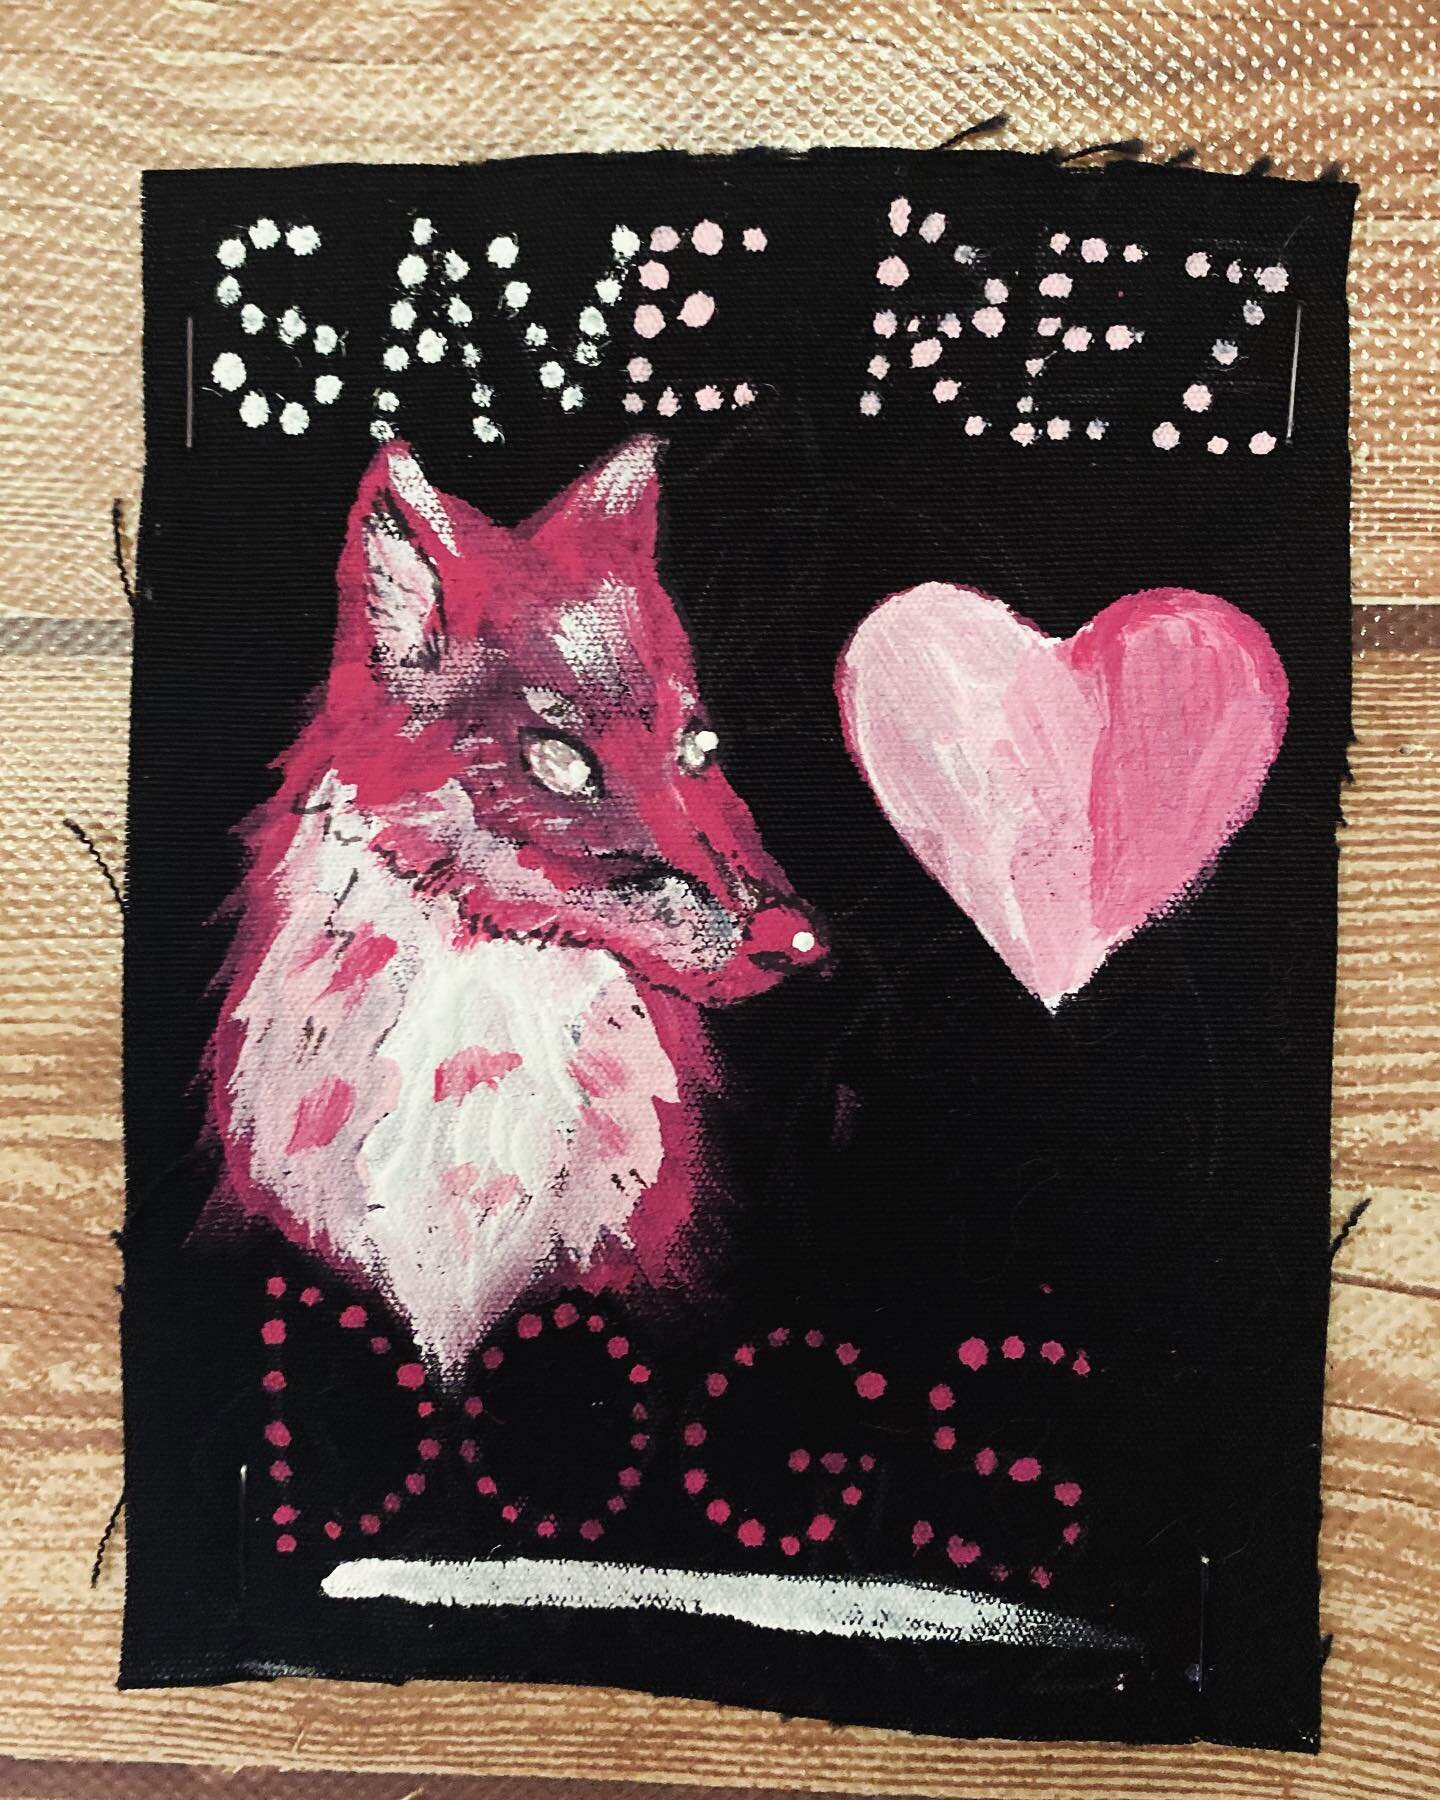 Shout out to Wolfie (an amazing Oskayak student) for their pink Save Rez Dogs patch! Pink shirt day things at Oskayak High School! 💖🐺

#saverezdogs #loverezdogs #rezdogs #pinkshirtday #oskayakhighschool #firstnations #artist #student